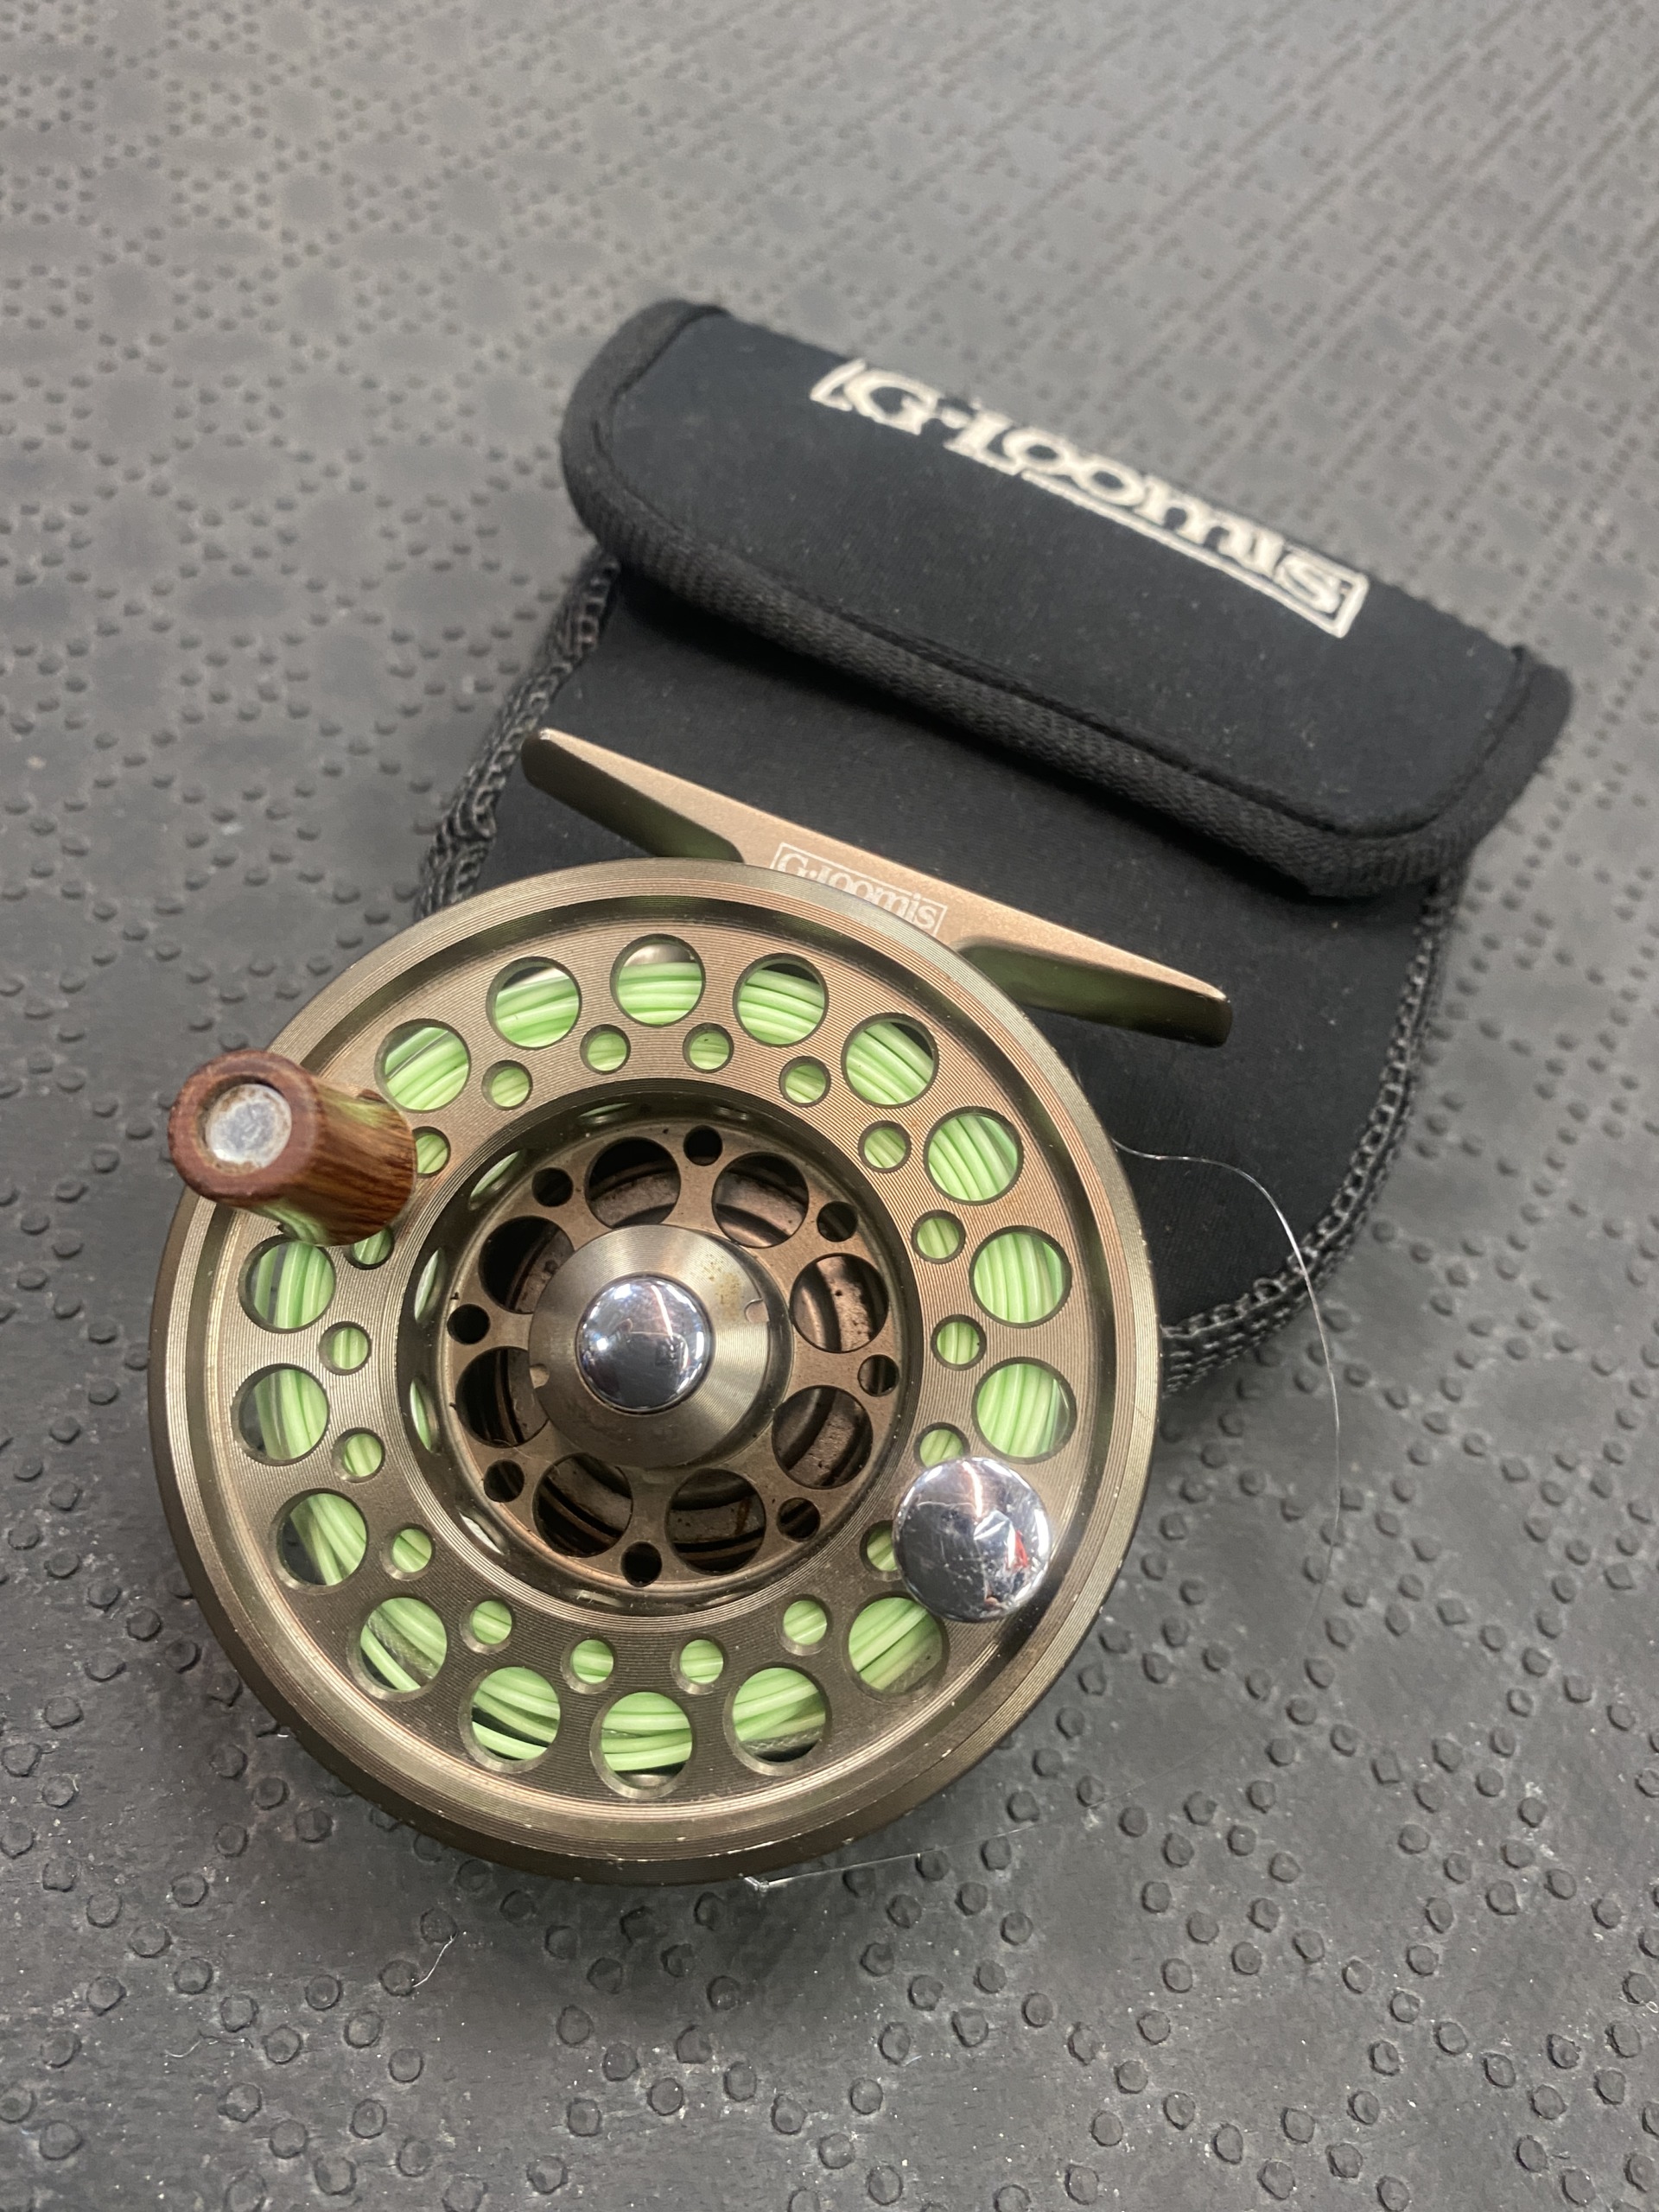 https://thefirstcast.ca/wp-content/uploads/2021/08/G-Loomis-Eastfork-Fly-Reel-cw-Pouch-and-4wt-Fly-Line-B-scaled.jpg